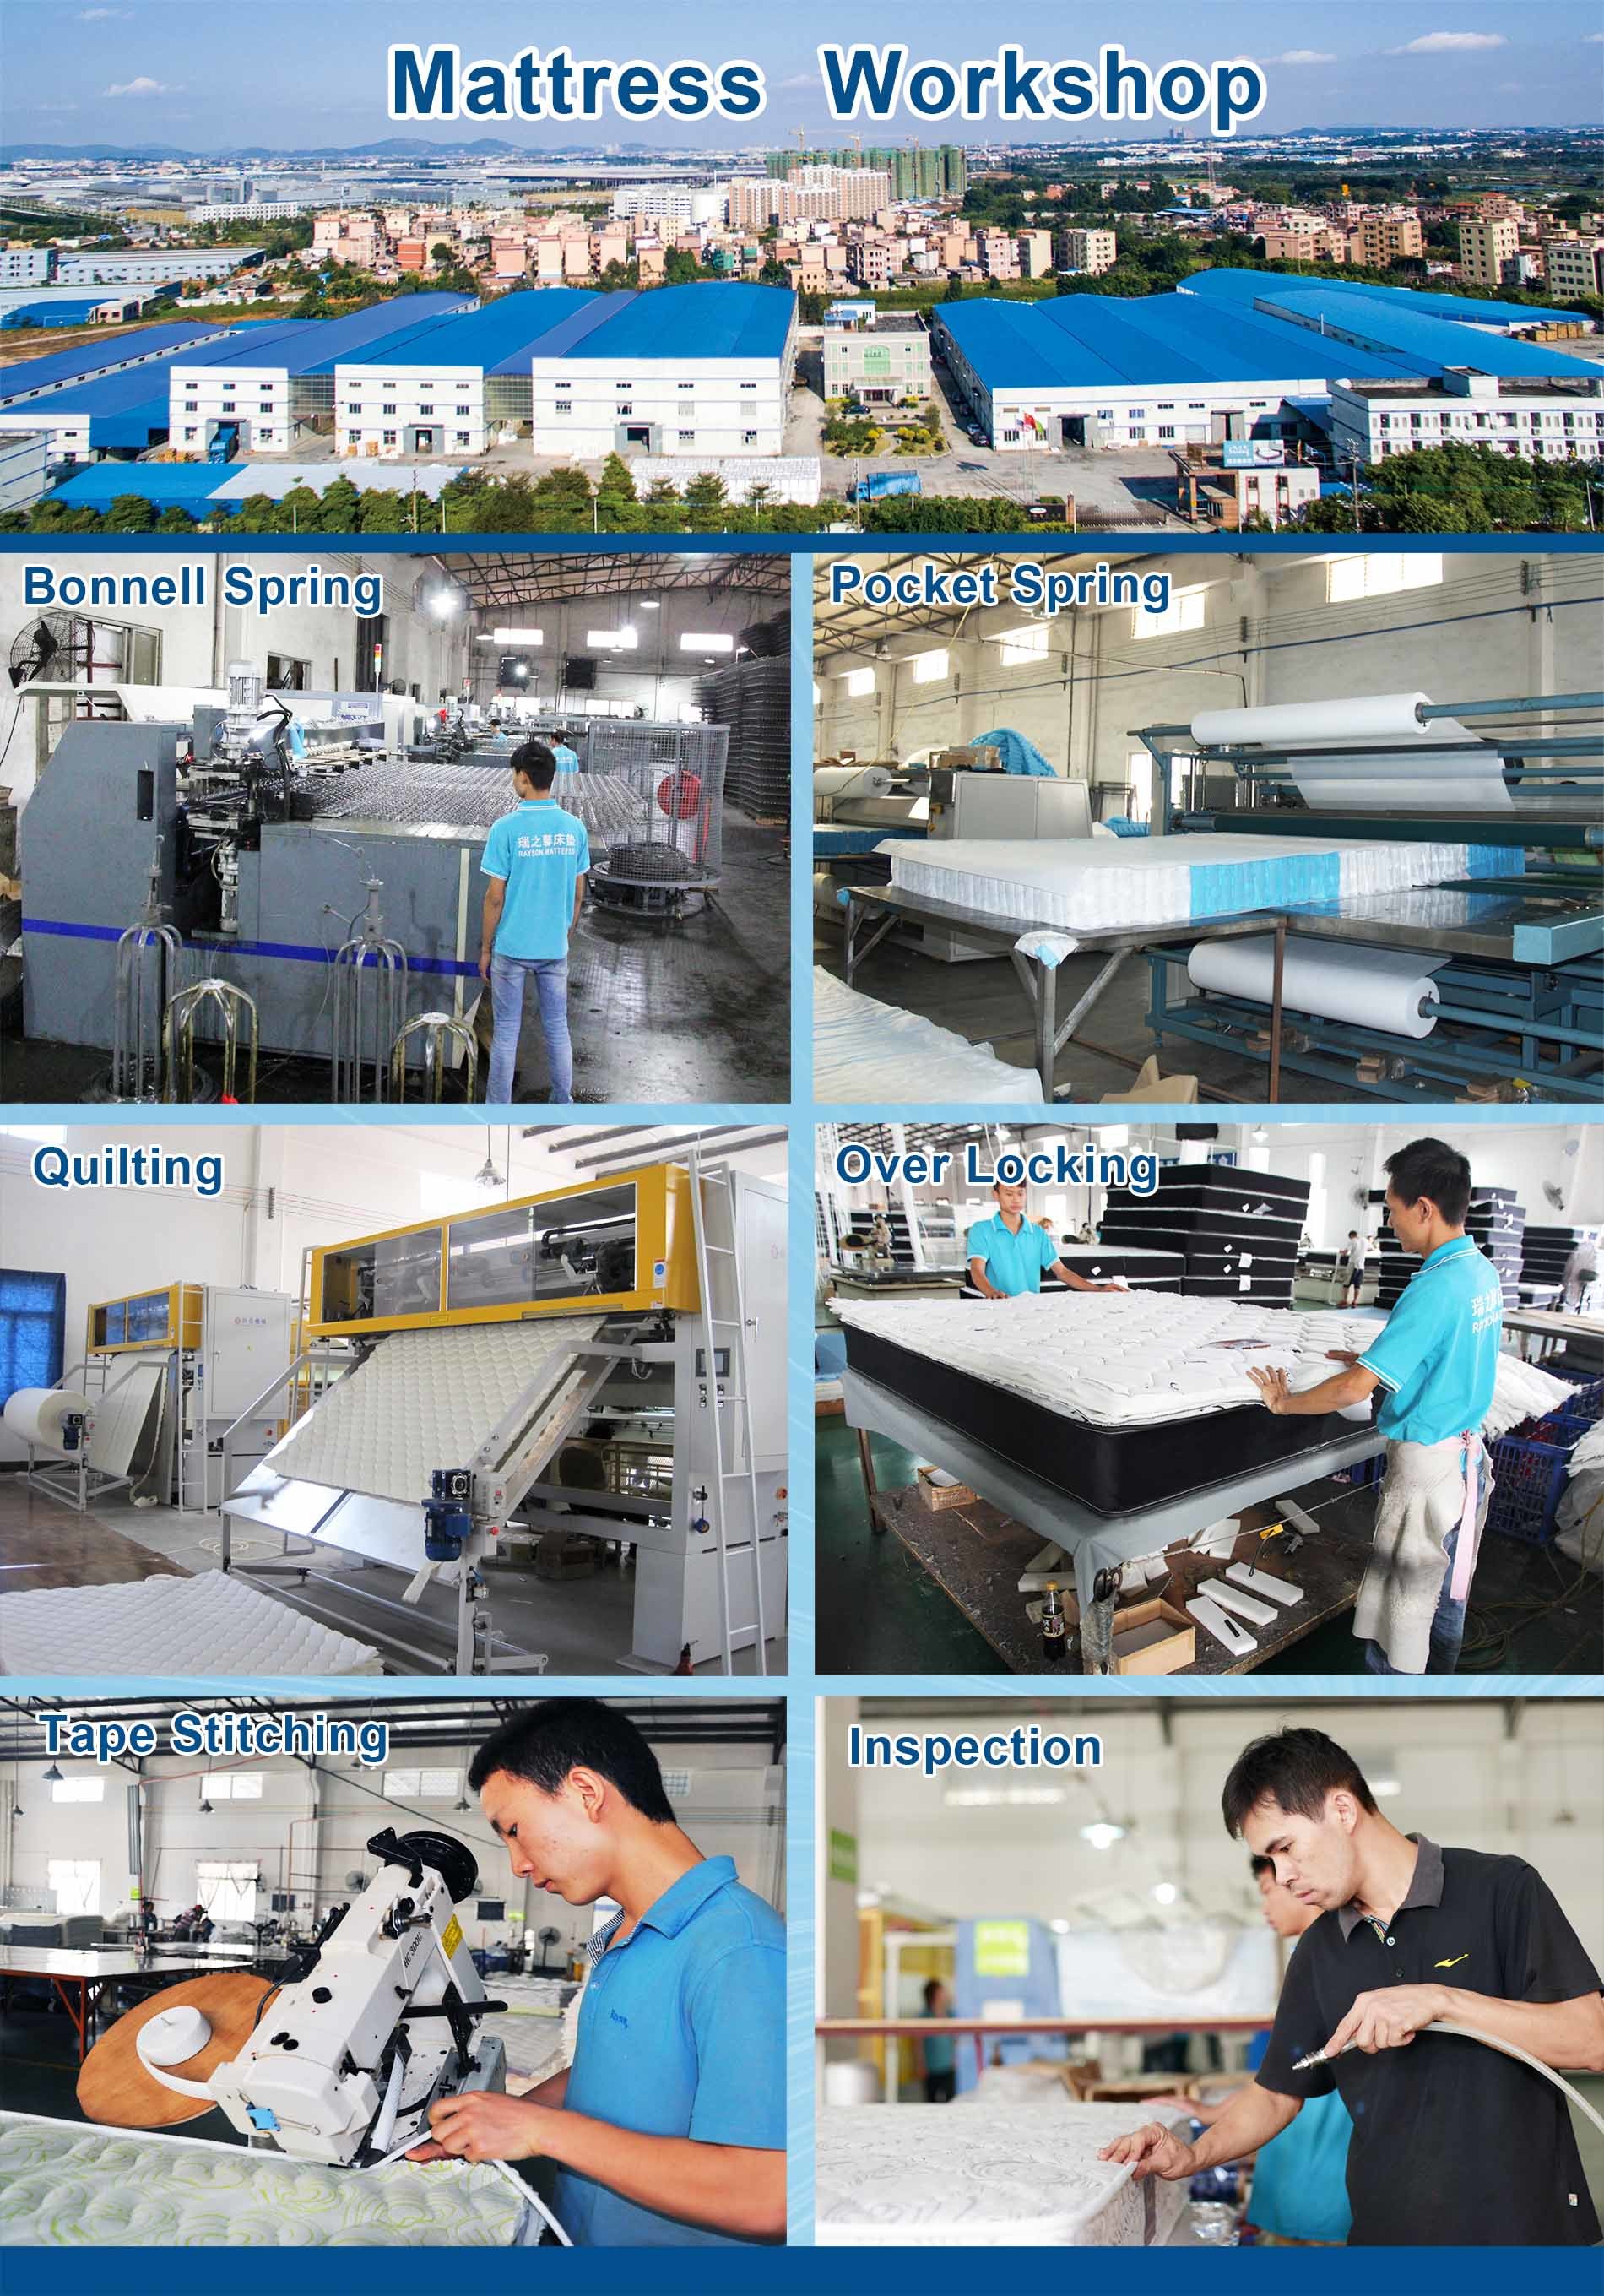 31cm mattress top rated hotel mattresses Synwin manufacture